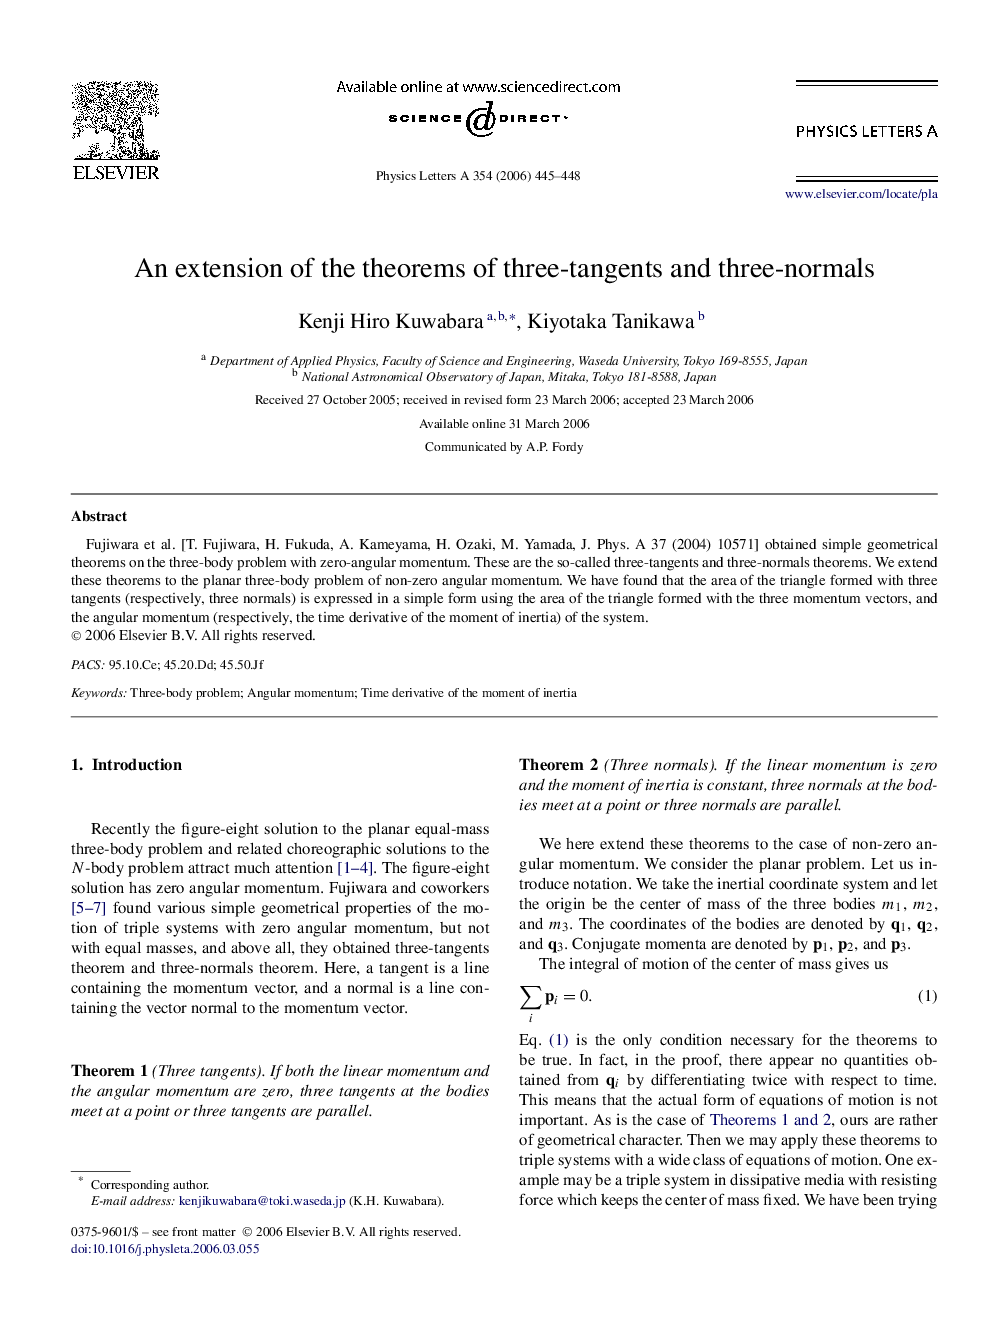 An extension of the theorems of three-tangents and three-normals